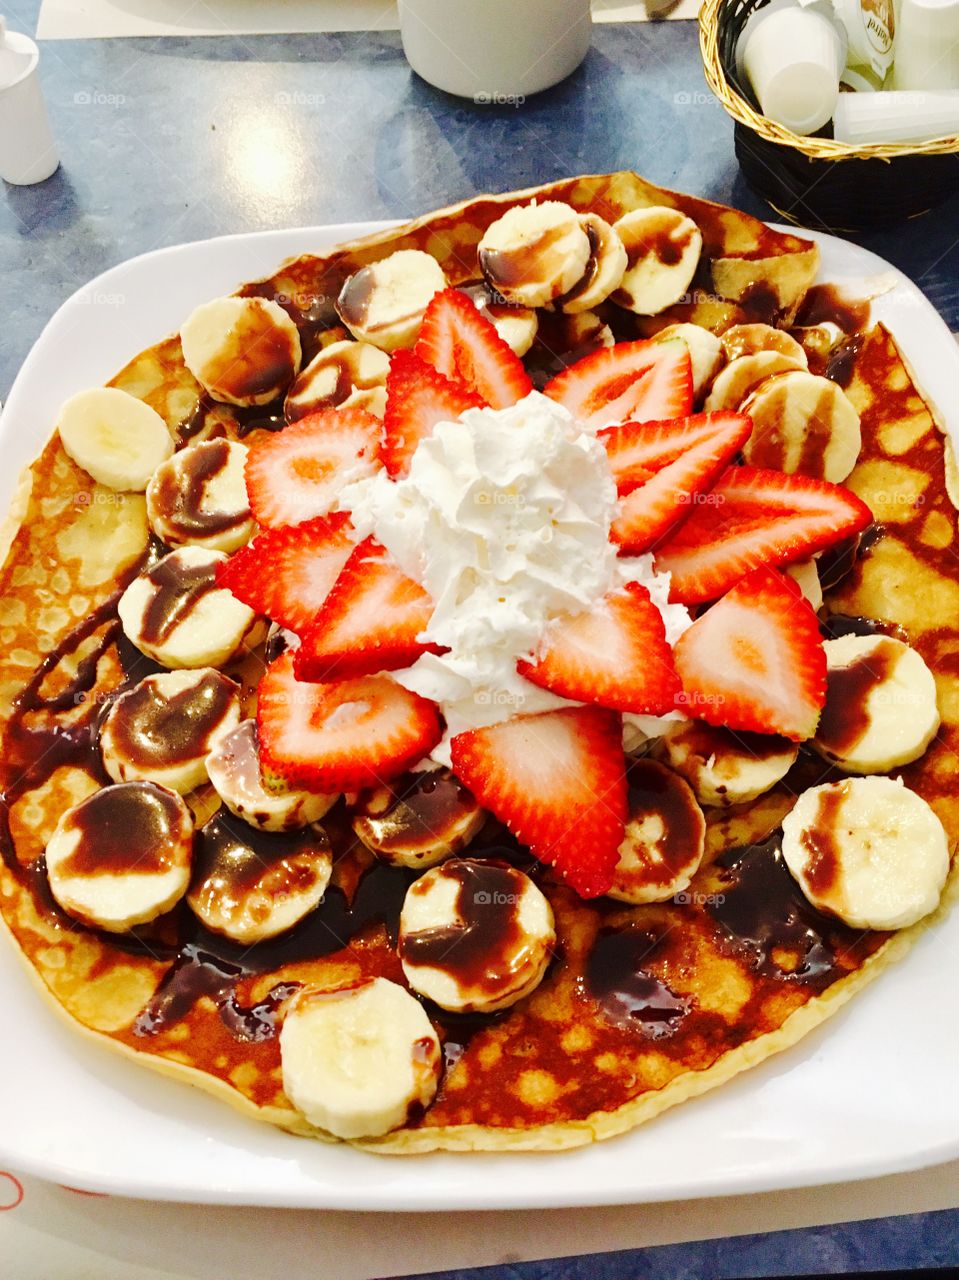 Beautiful and Delicious Strawberries-Bananas chocolate Pancakes-May 07 2017-Montreal, Quebec, Canada